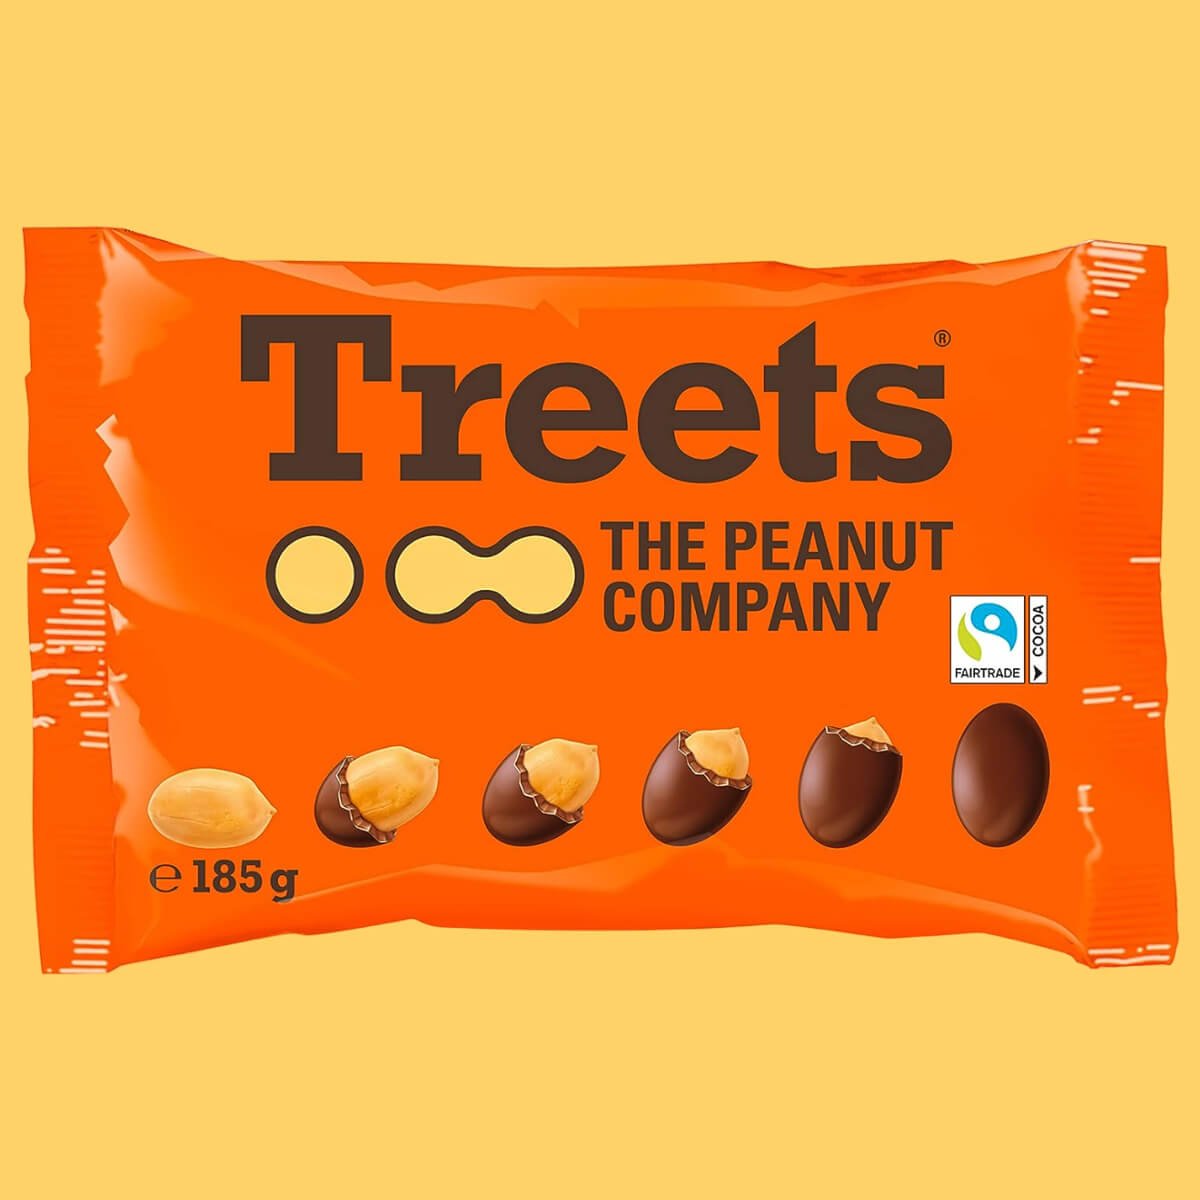 An orange packet of Treets Peanut from 2023 by Treets The Peanut Company.